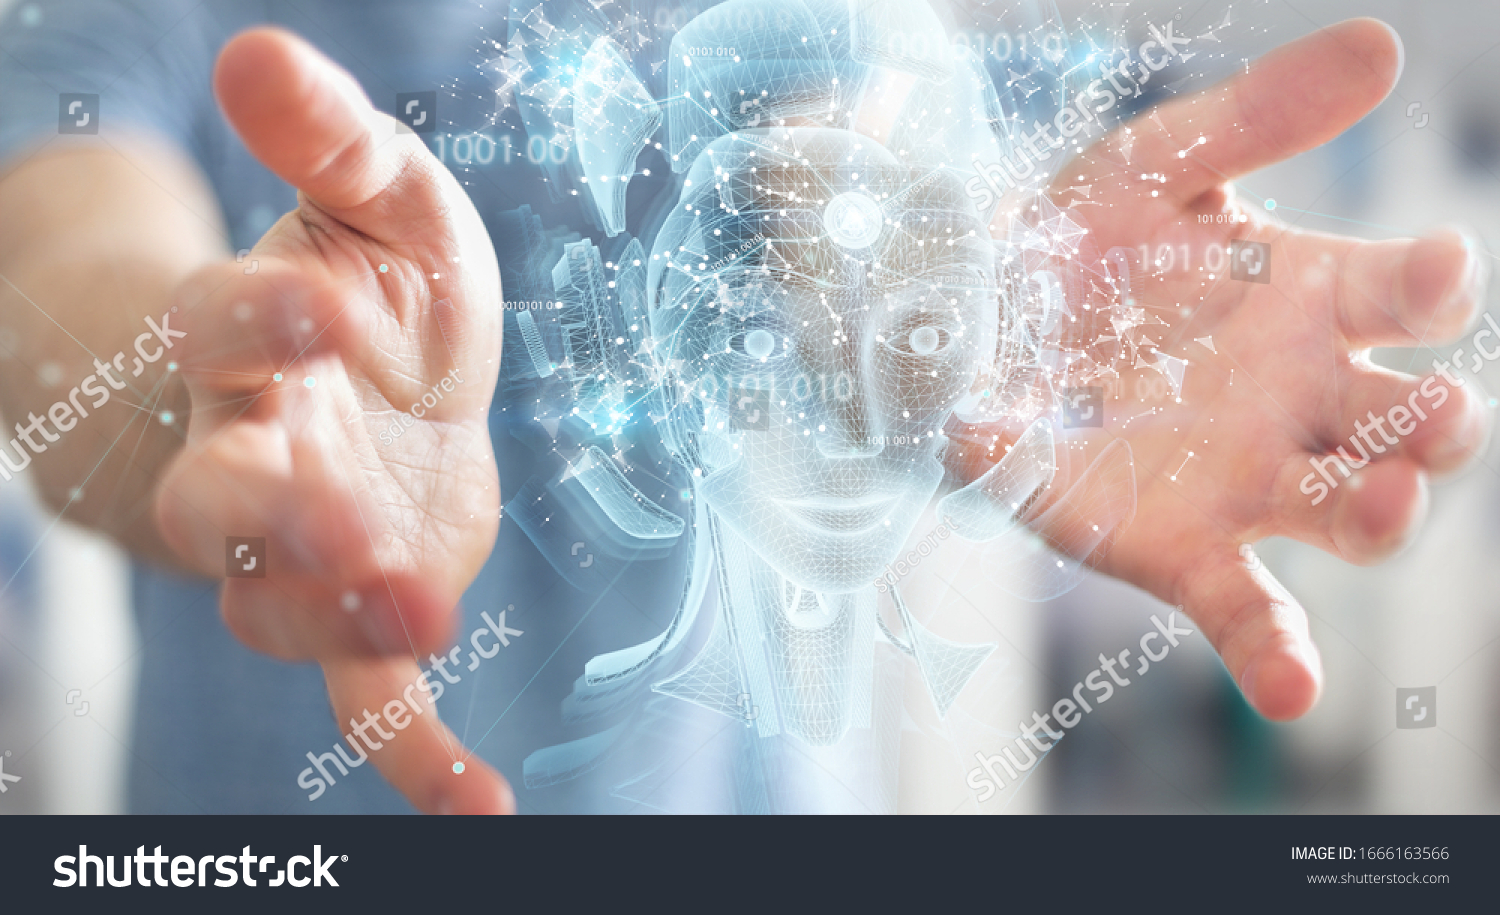 Man on blurred background using digital artificial intelligence holographic projection 3D rendering #1666163566